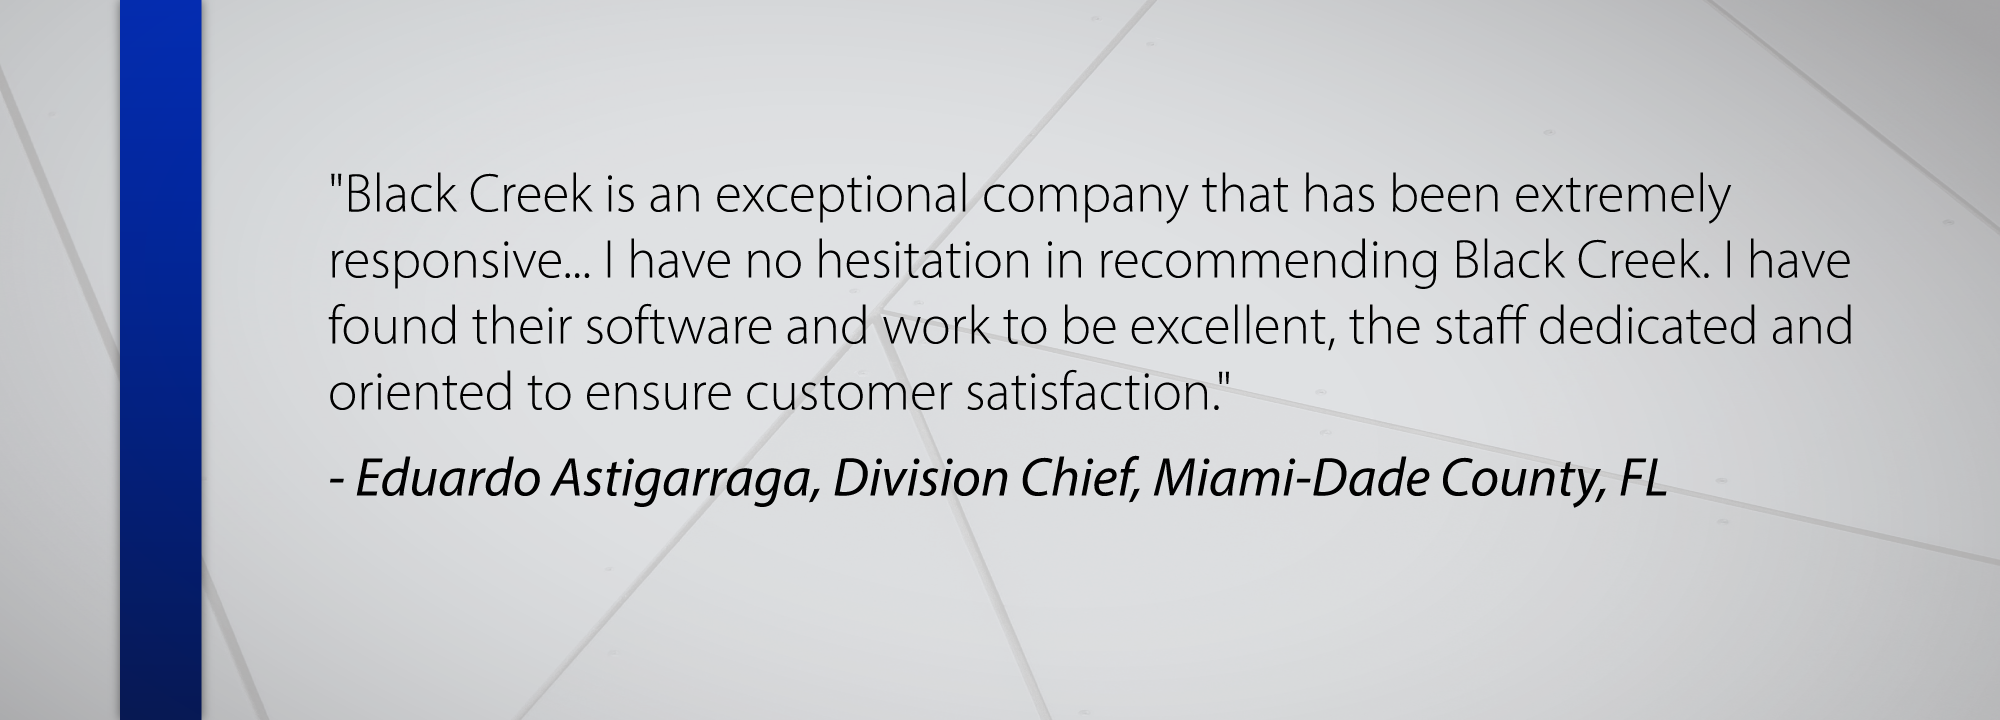 Black Creek is an exceptional company that has been extremely responsive... I have no hesitation in recommending Black Creek. I have found their software and work to be excellent, the staff dedicated and oriented to ensure customer satisfaction. - Eduardo Astigarraga, Division Chief, Miami-Dade County